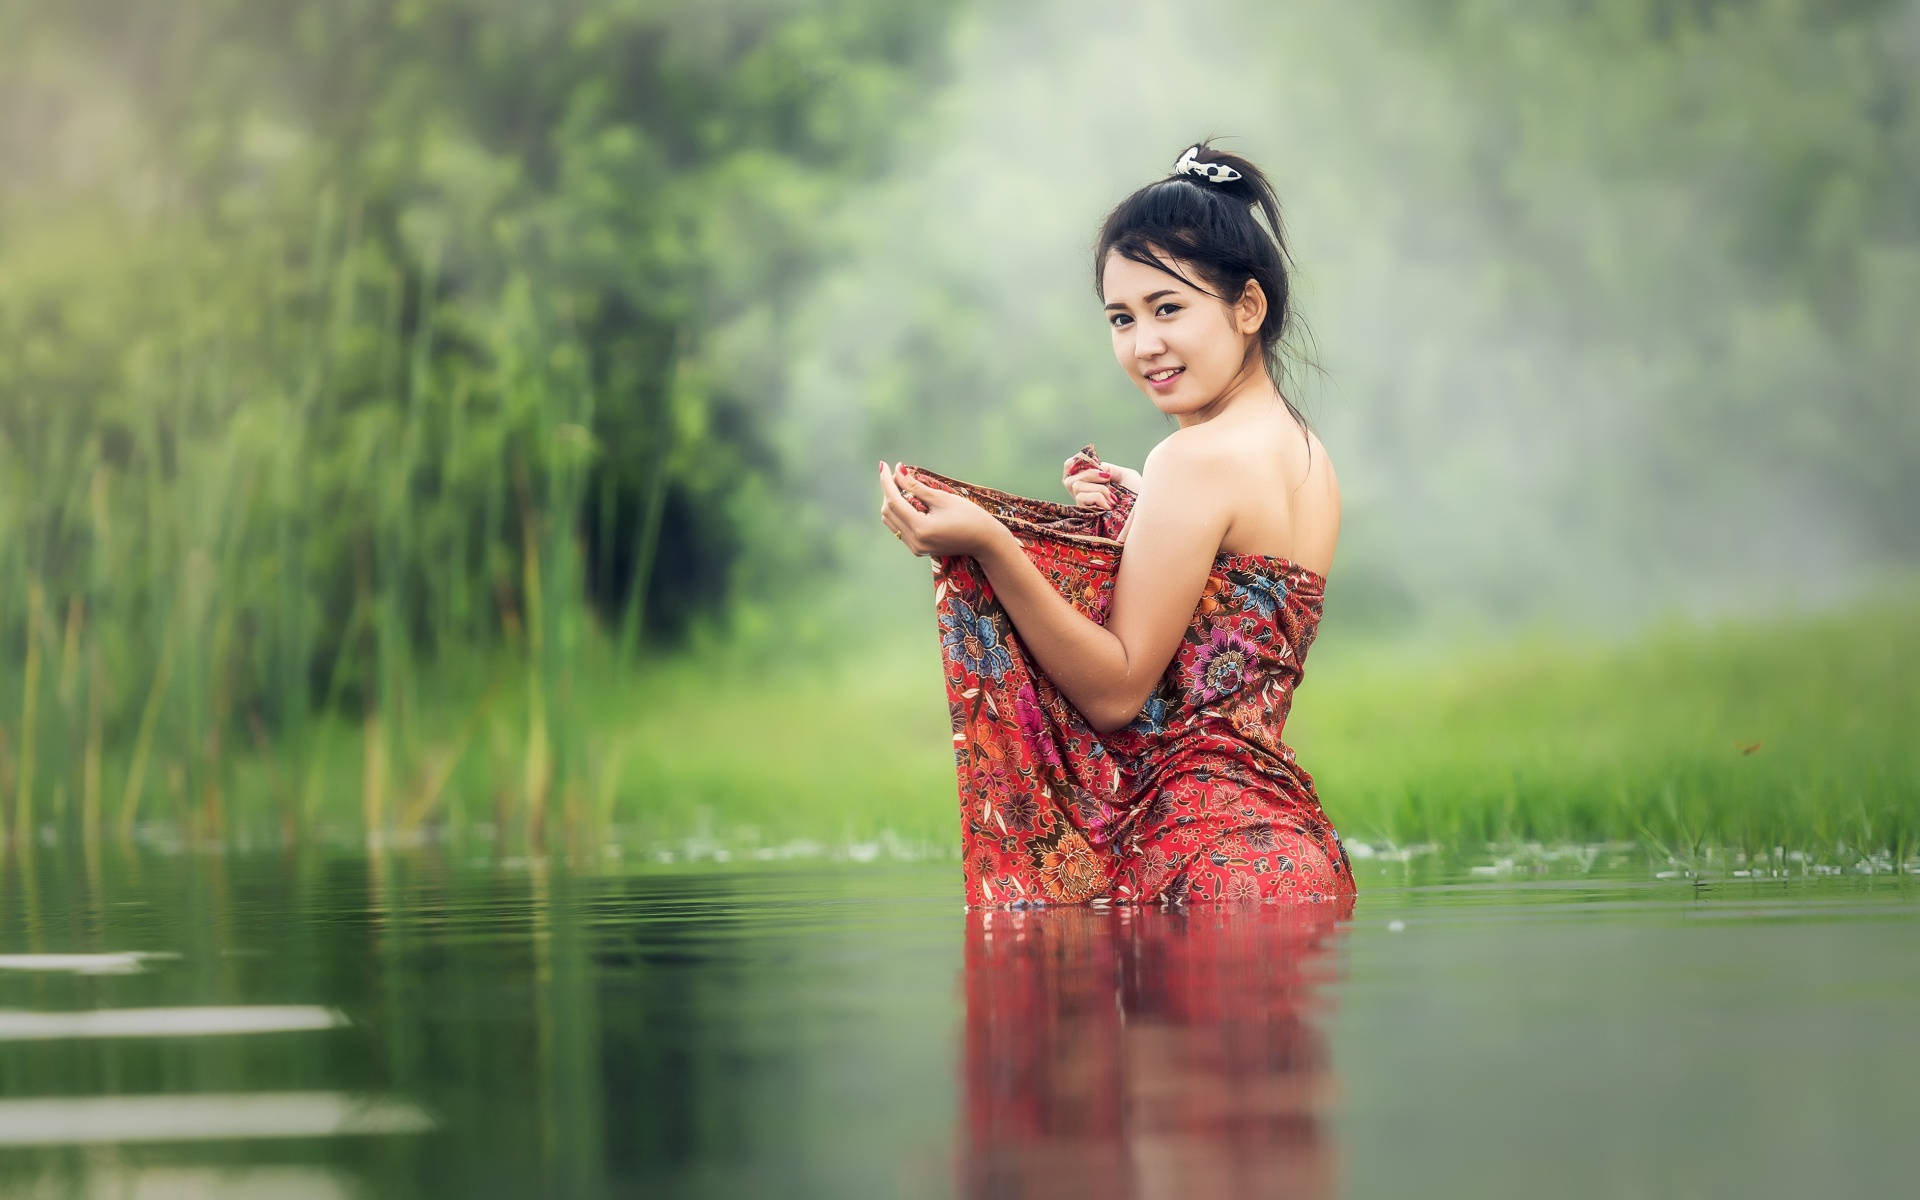 Asian Women Bathing In The River Background